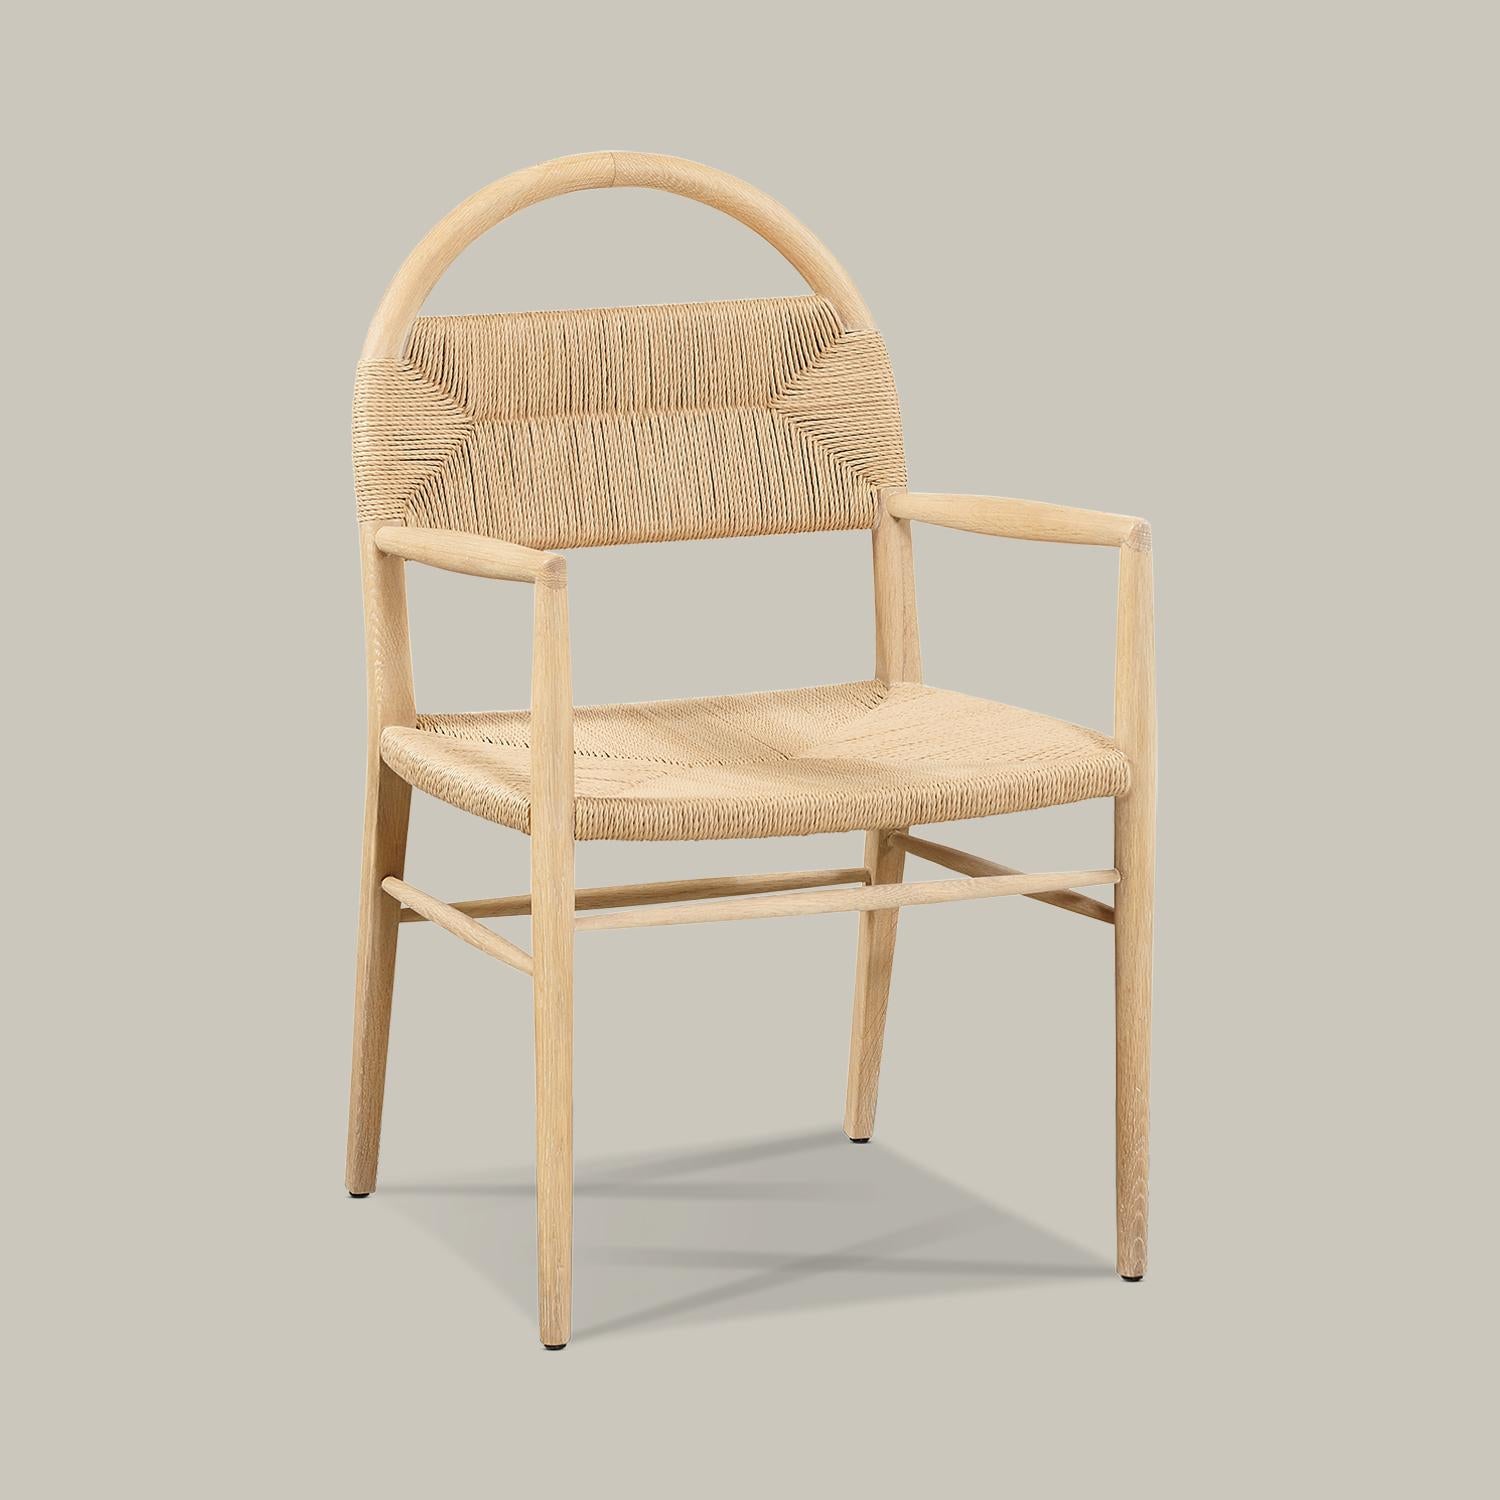 A solid wood arched frame threads through a woven rush seat with arms and backrest to form this well-proportioned, minimalist chair for dining, desk, vanity or an accent in any room. Handmade in Vietnam, this piece is available in cerused European